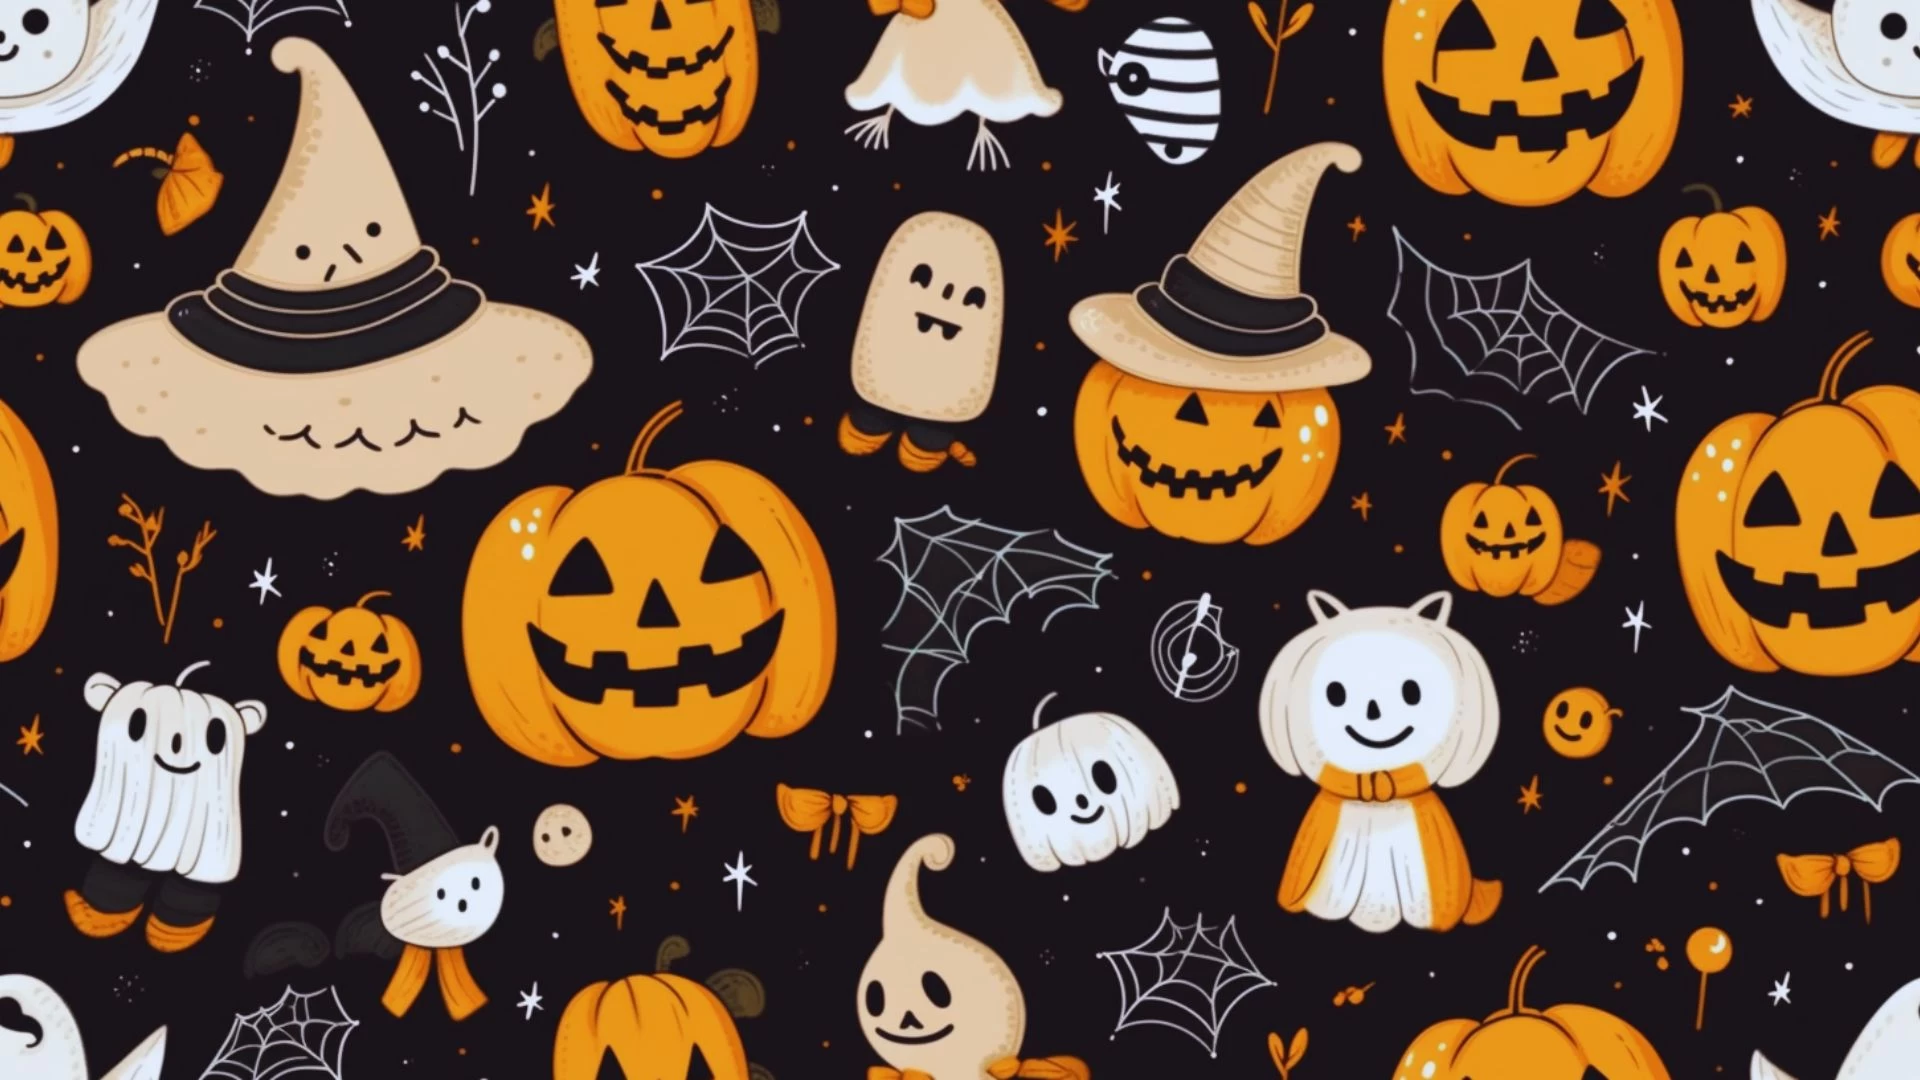 99% Will Fail To Find The Hidden Lollipop in this Halloween Image in Just 8 Secs